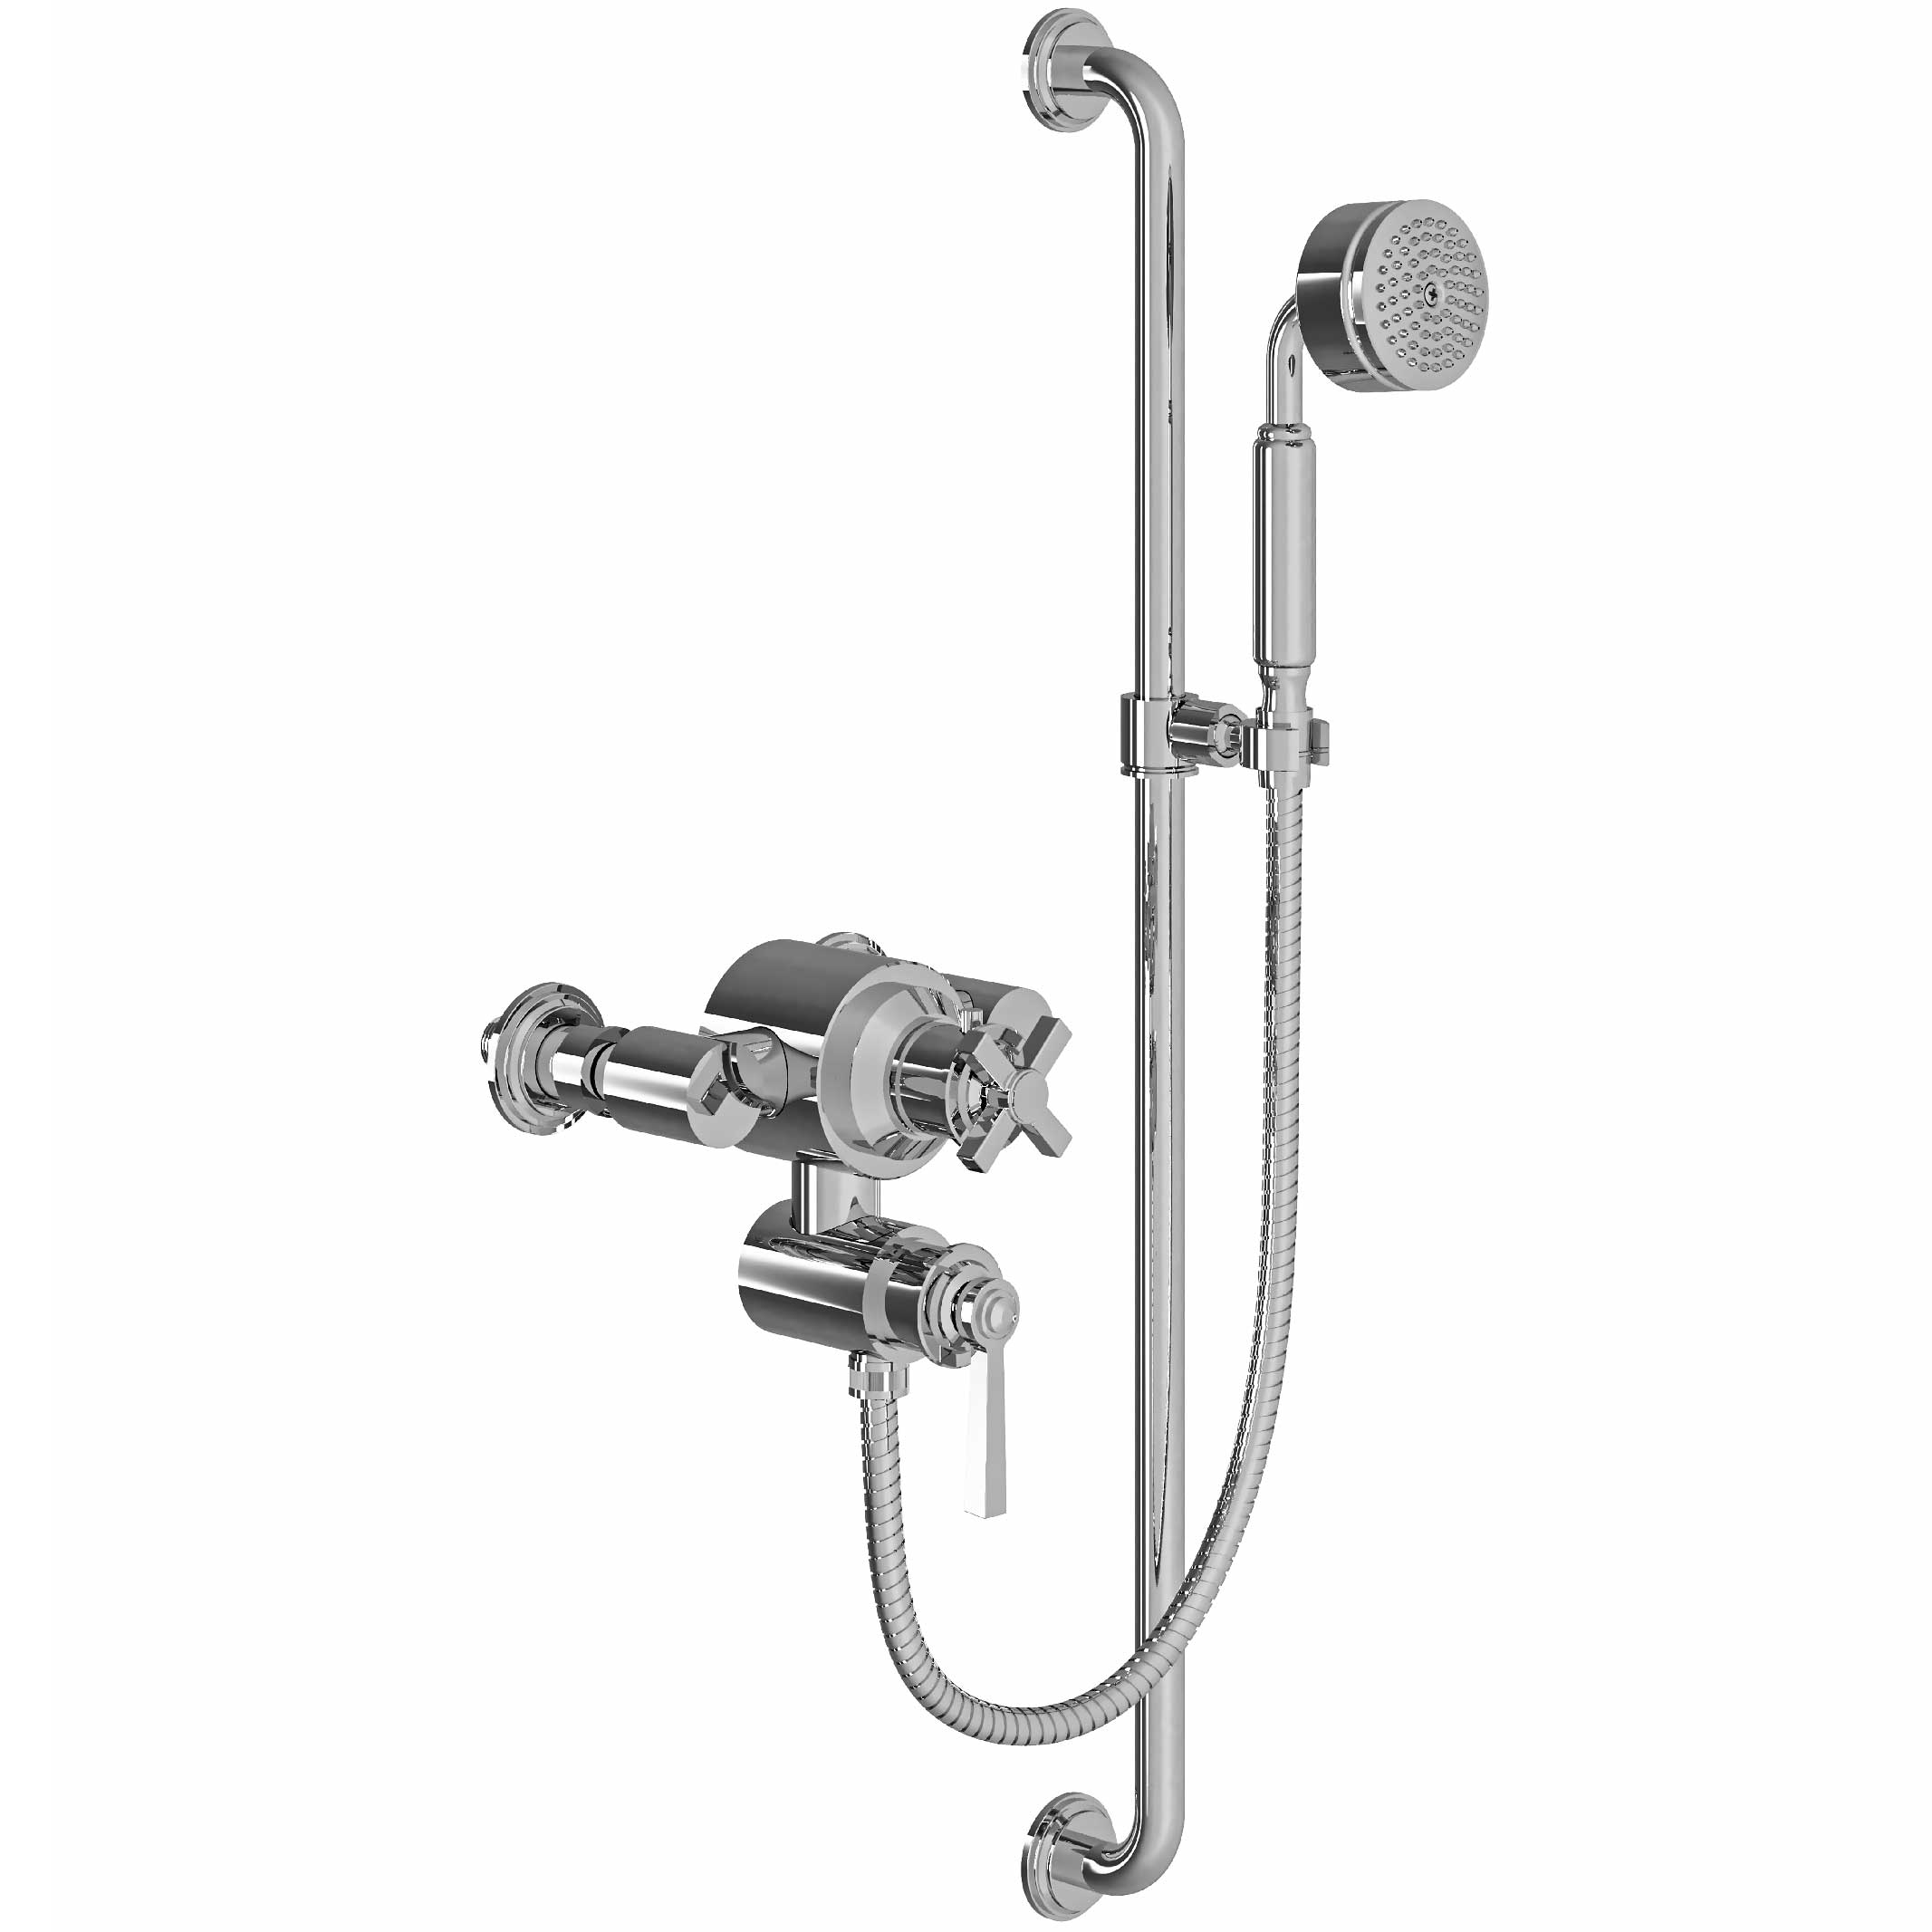 M60-2202T Mitigeur thermo. douche, coulidouche